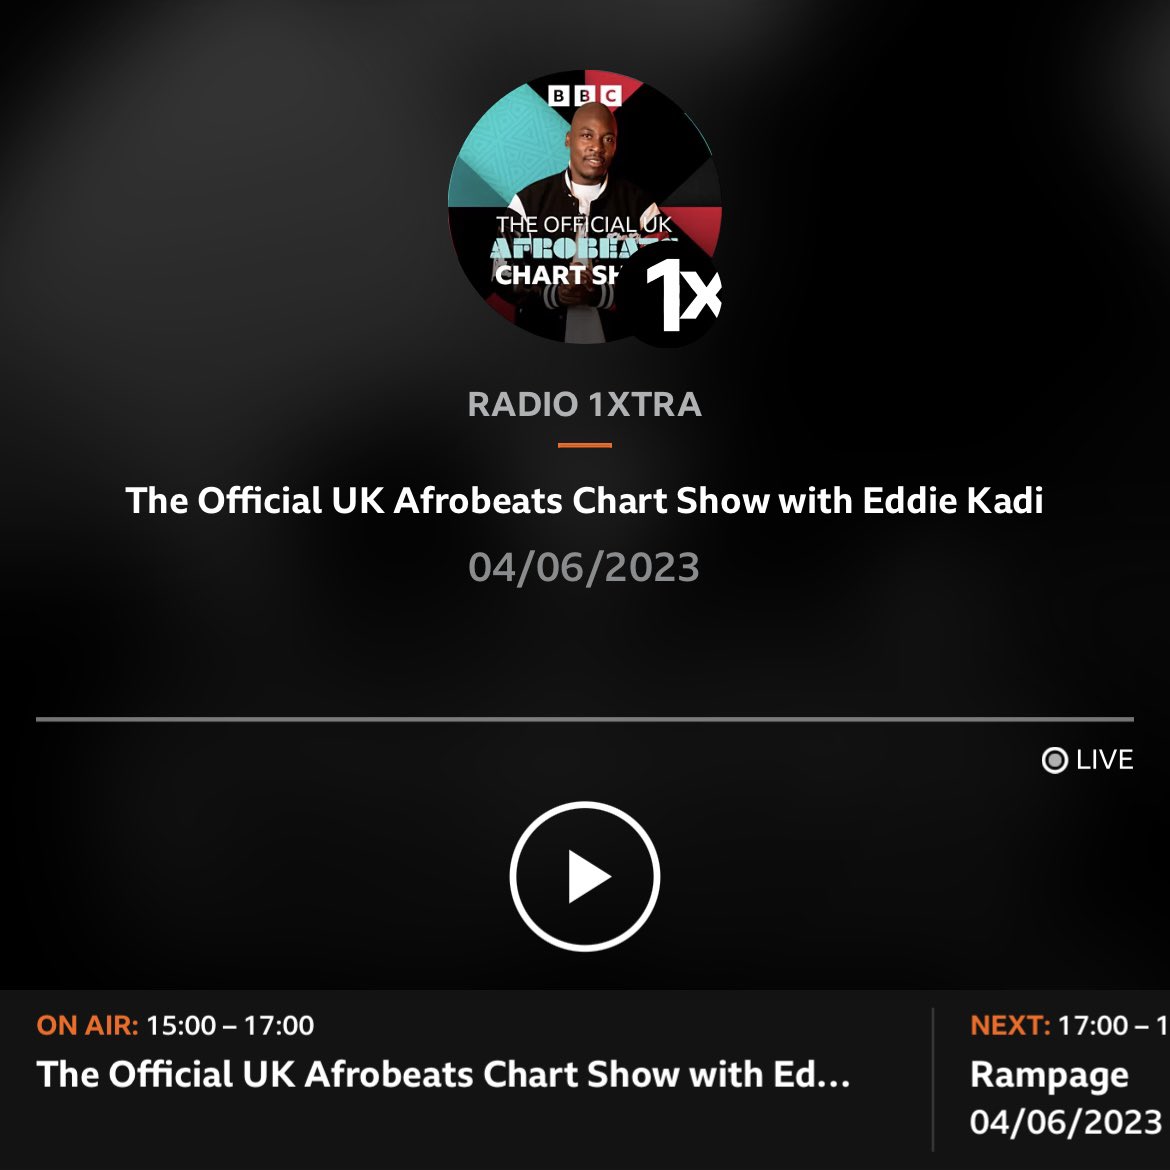 Super blessed to be joining @bbc1xtra ‘s table discussion around African music in 2023 now alongside @anyikowoko 🇰🇪 @jimdfirst 🇳🇬 & hosted by @EddieKadi 🇨🇩 Shout out to the team for having me on 🙏🙏@bryanobonyo @LanreShonubi @ukafrocharts Live stream : bbc.in/3oTDhLo